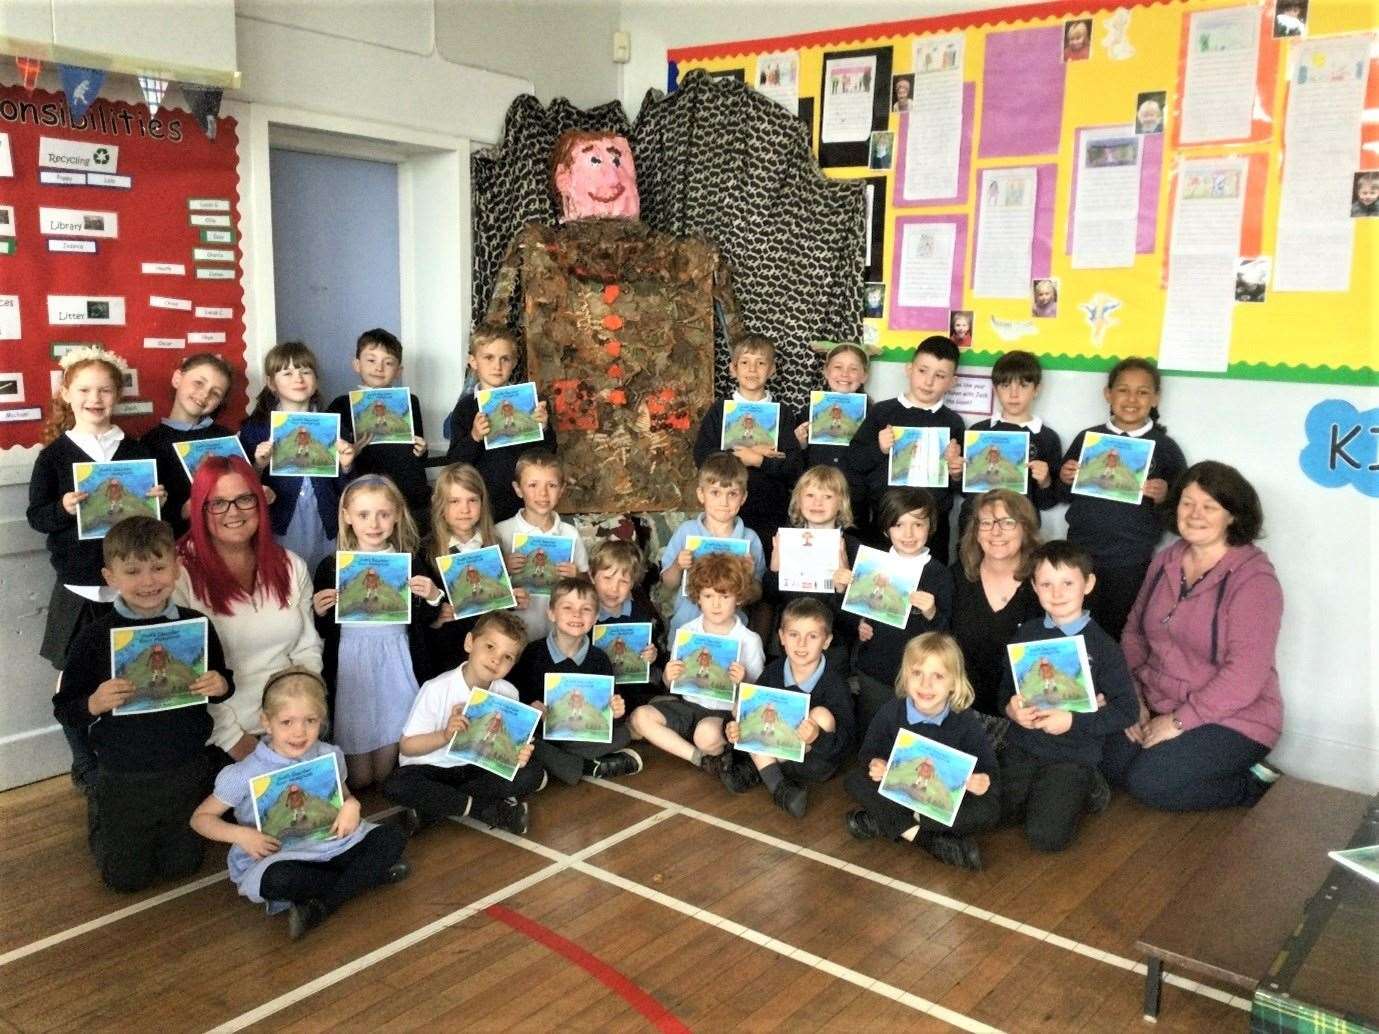 Monymusk Pupils have published their own book written in Doric